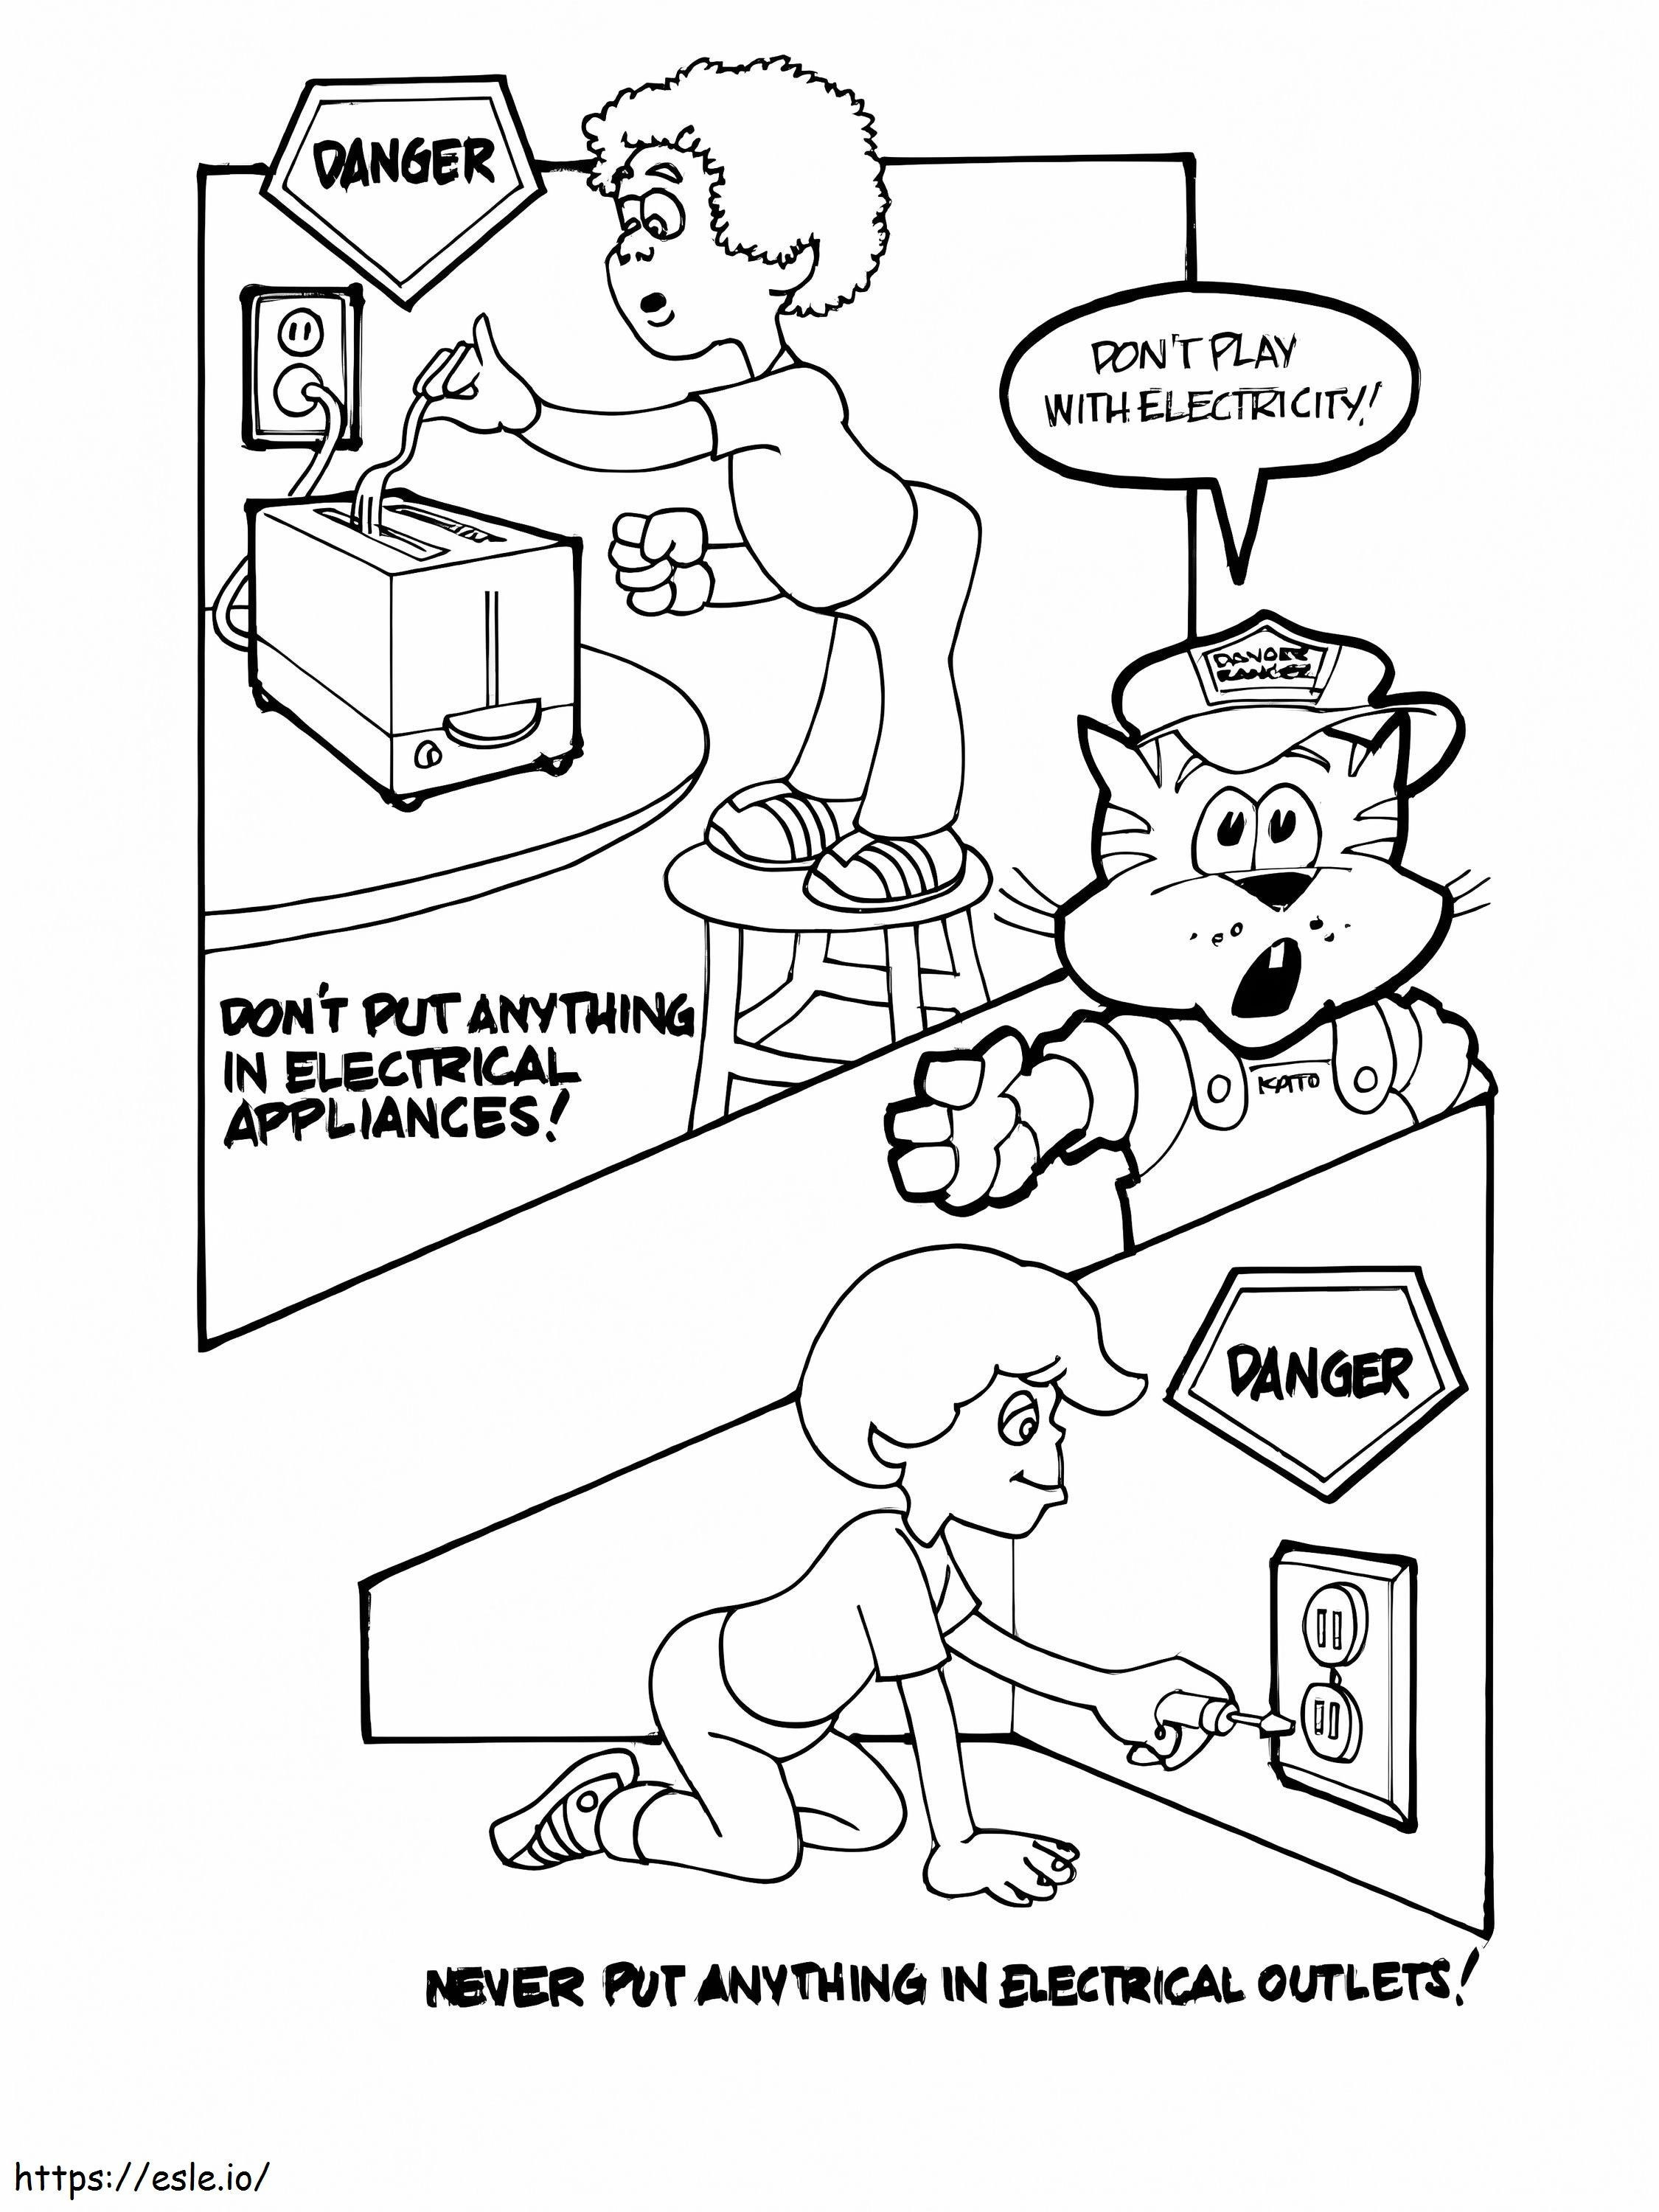 Dont Play With Electricity coloring page